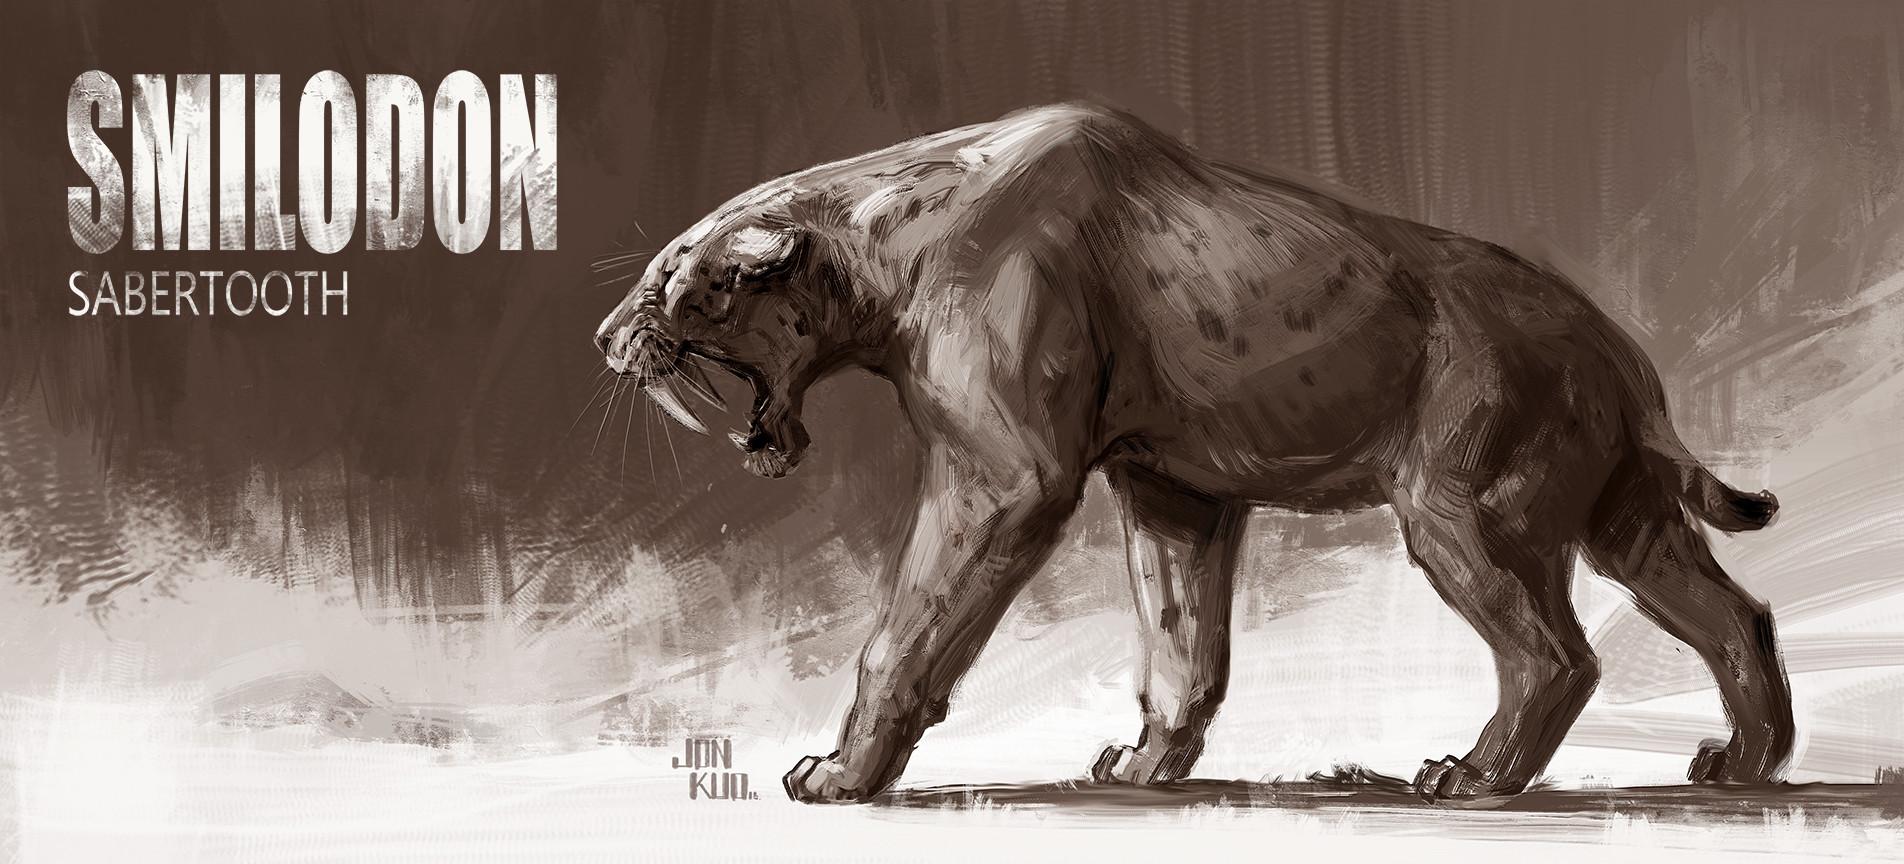 Smilodon Aka Sabertooth And Tooth Cat, HD Wallpaper